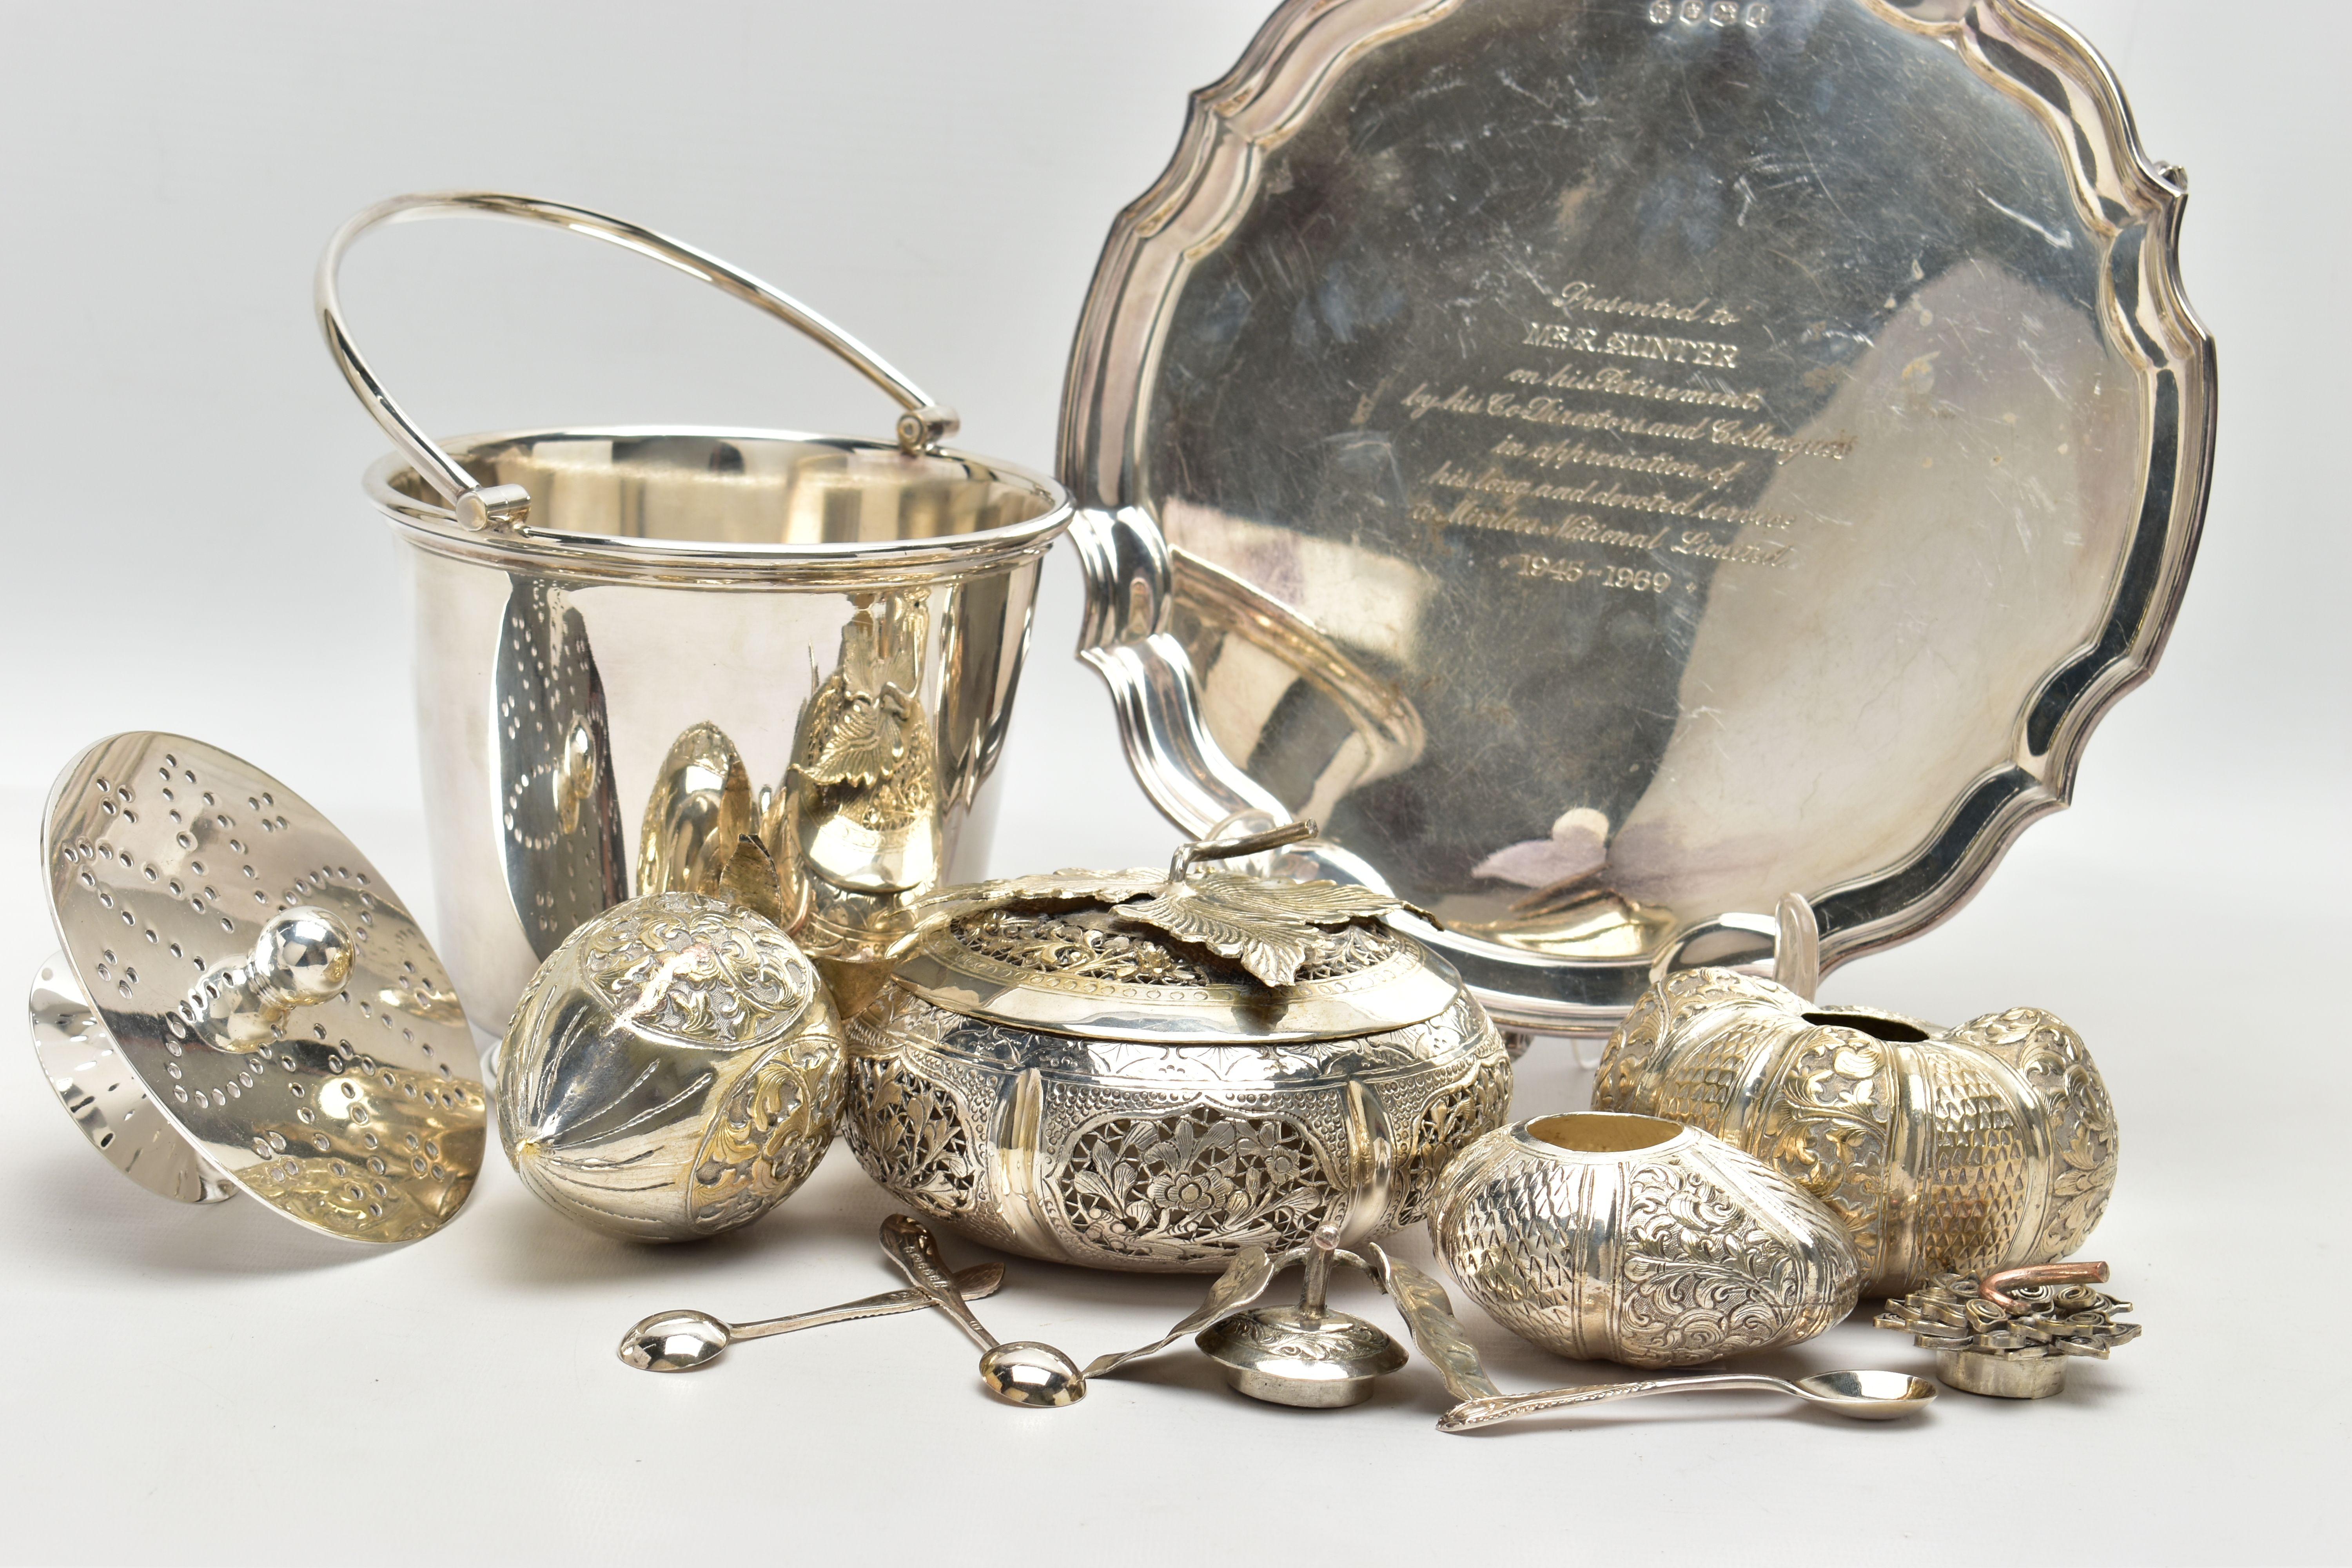 AN ELIZABETH II SILVER SALVER, TOGETHER WITH EIGHT SILVER PLATED ITEMS, the silver salver with - Image 7 of 14